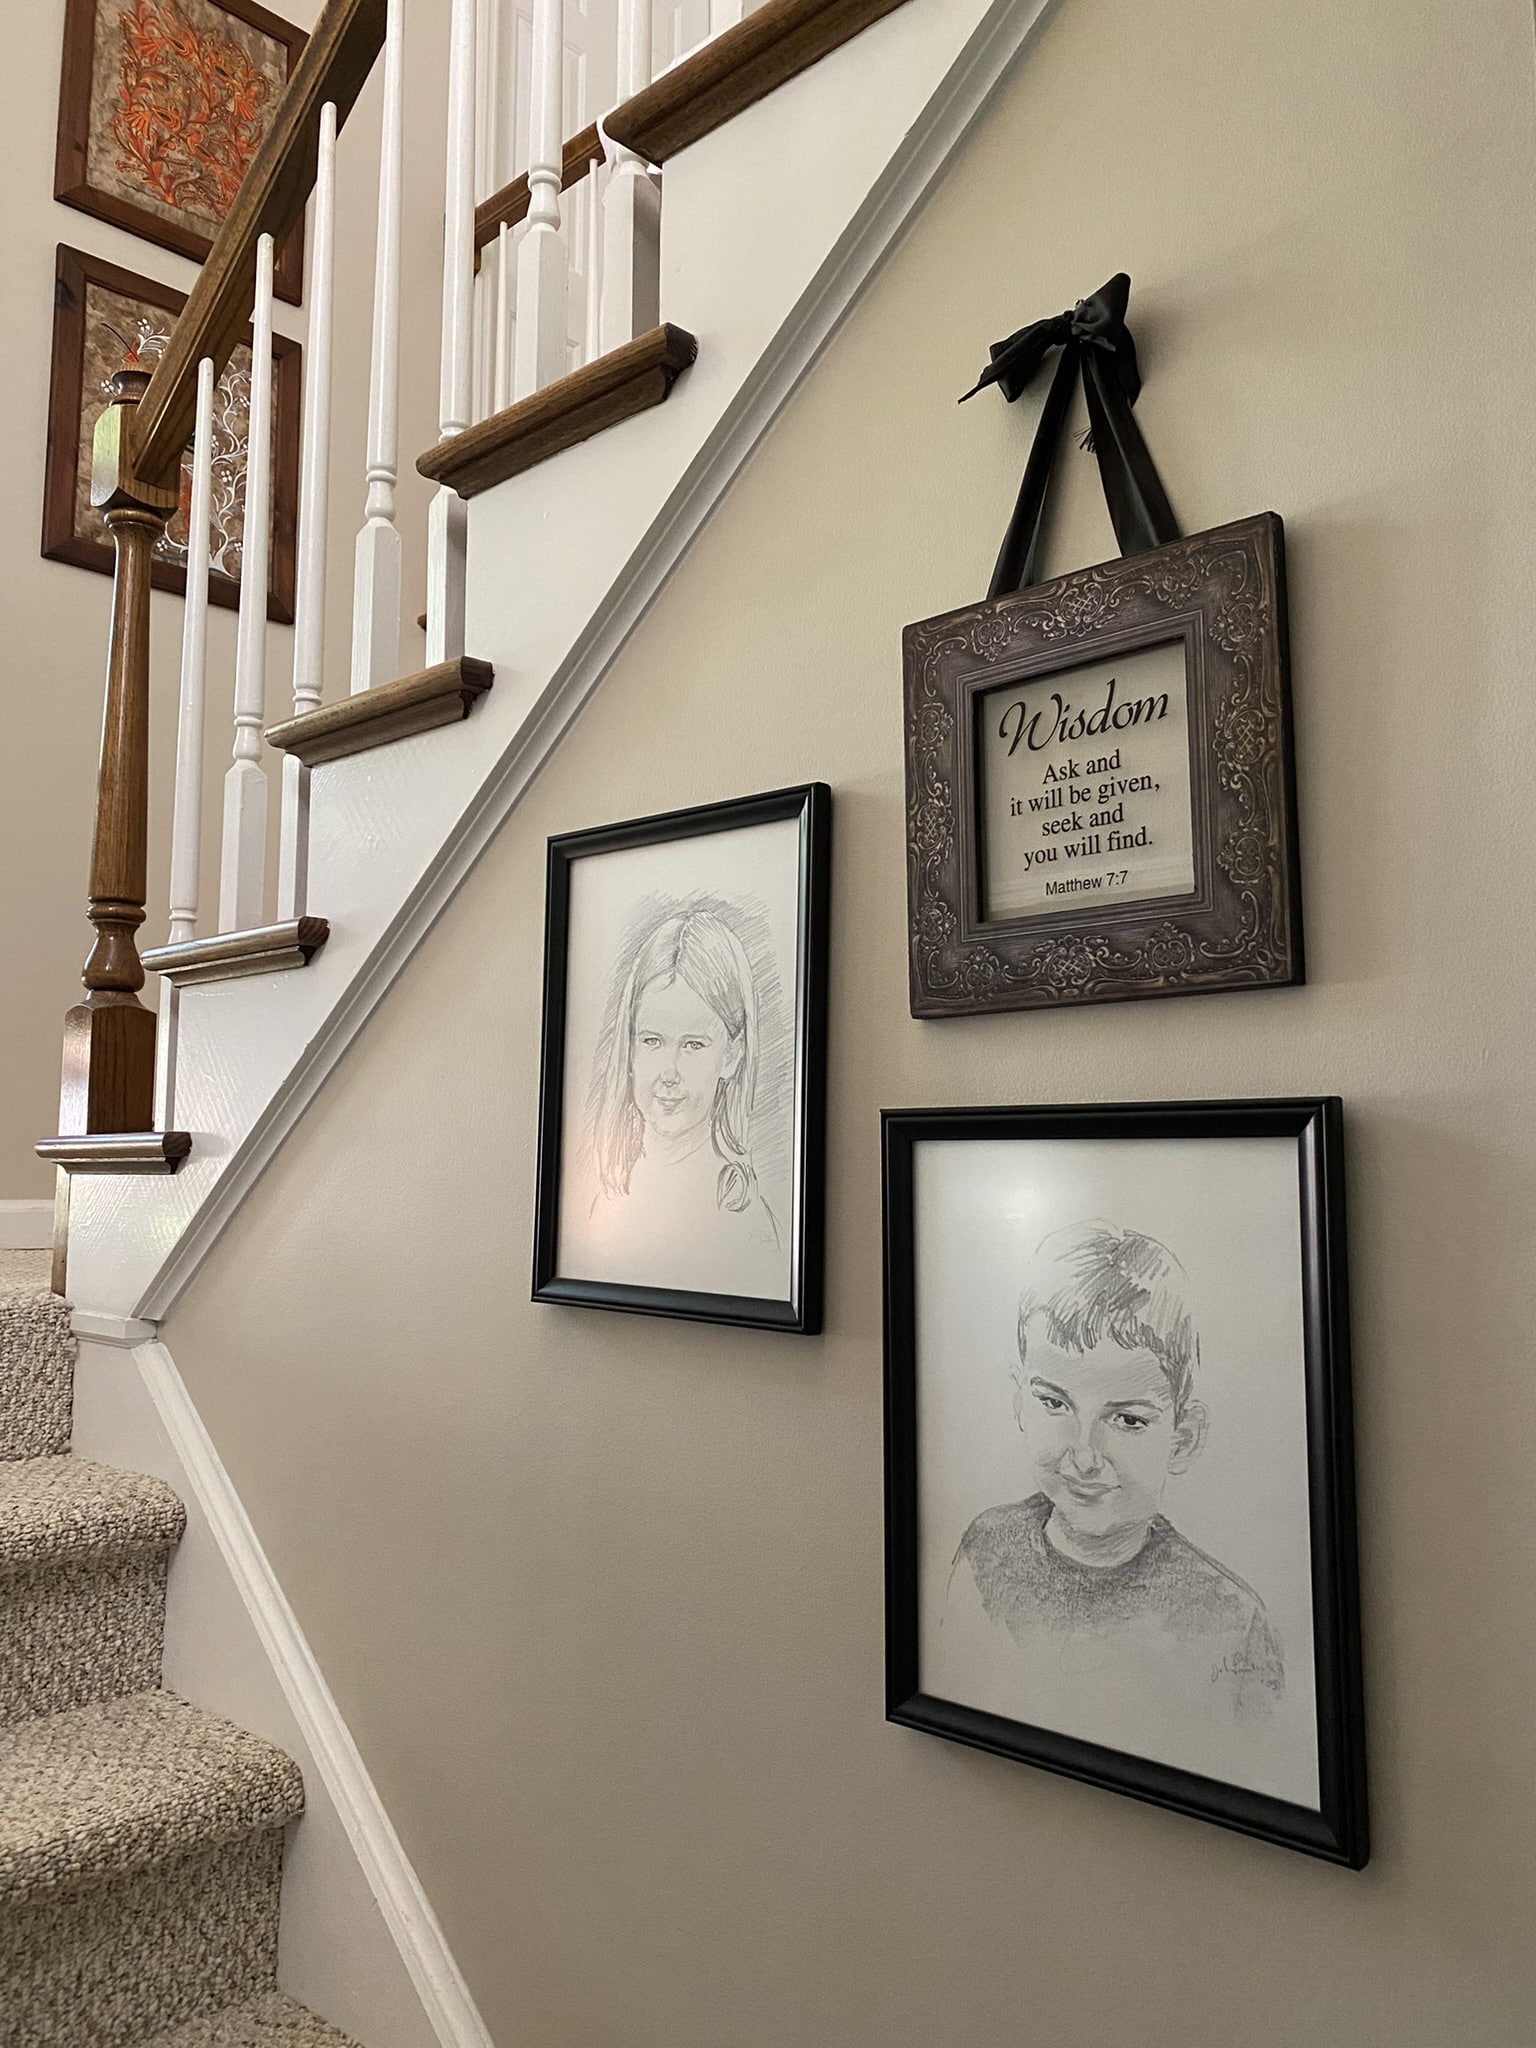 A winding staircase in a foyer with 3 pictures on the wall.